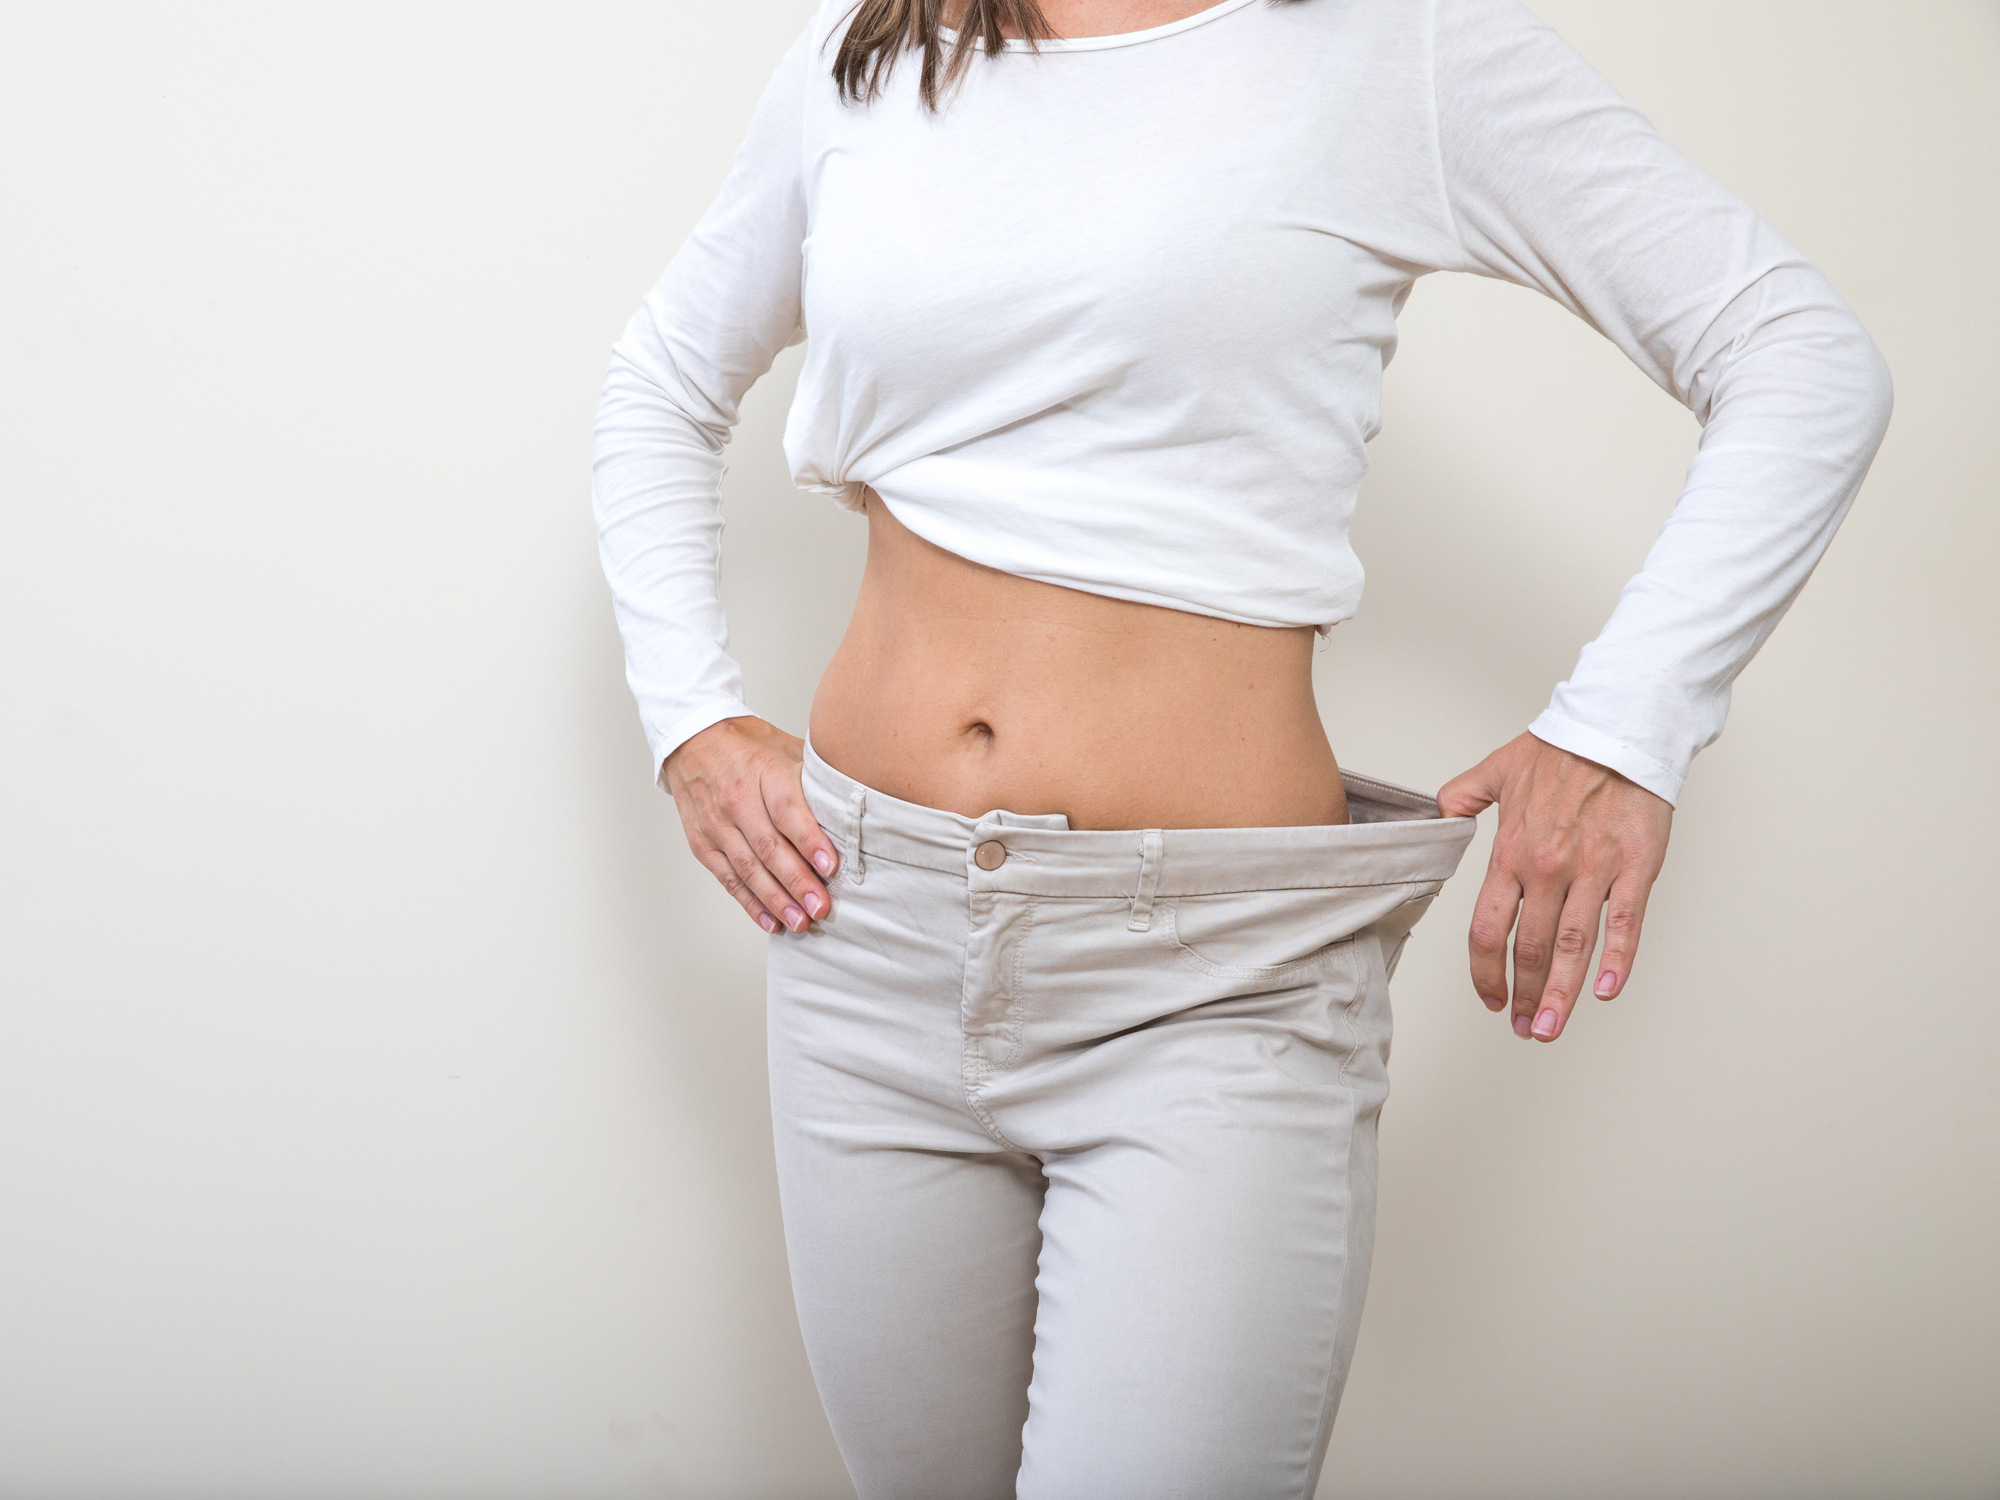 8 safe and sane steps to a flatter belly